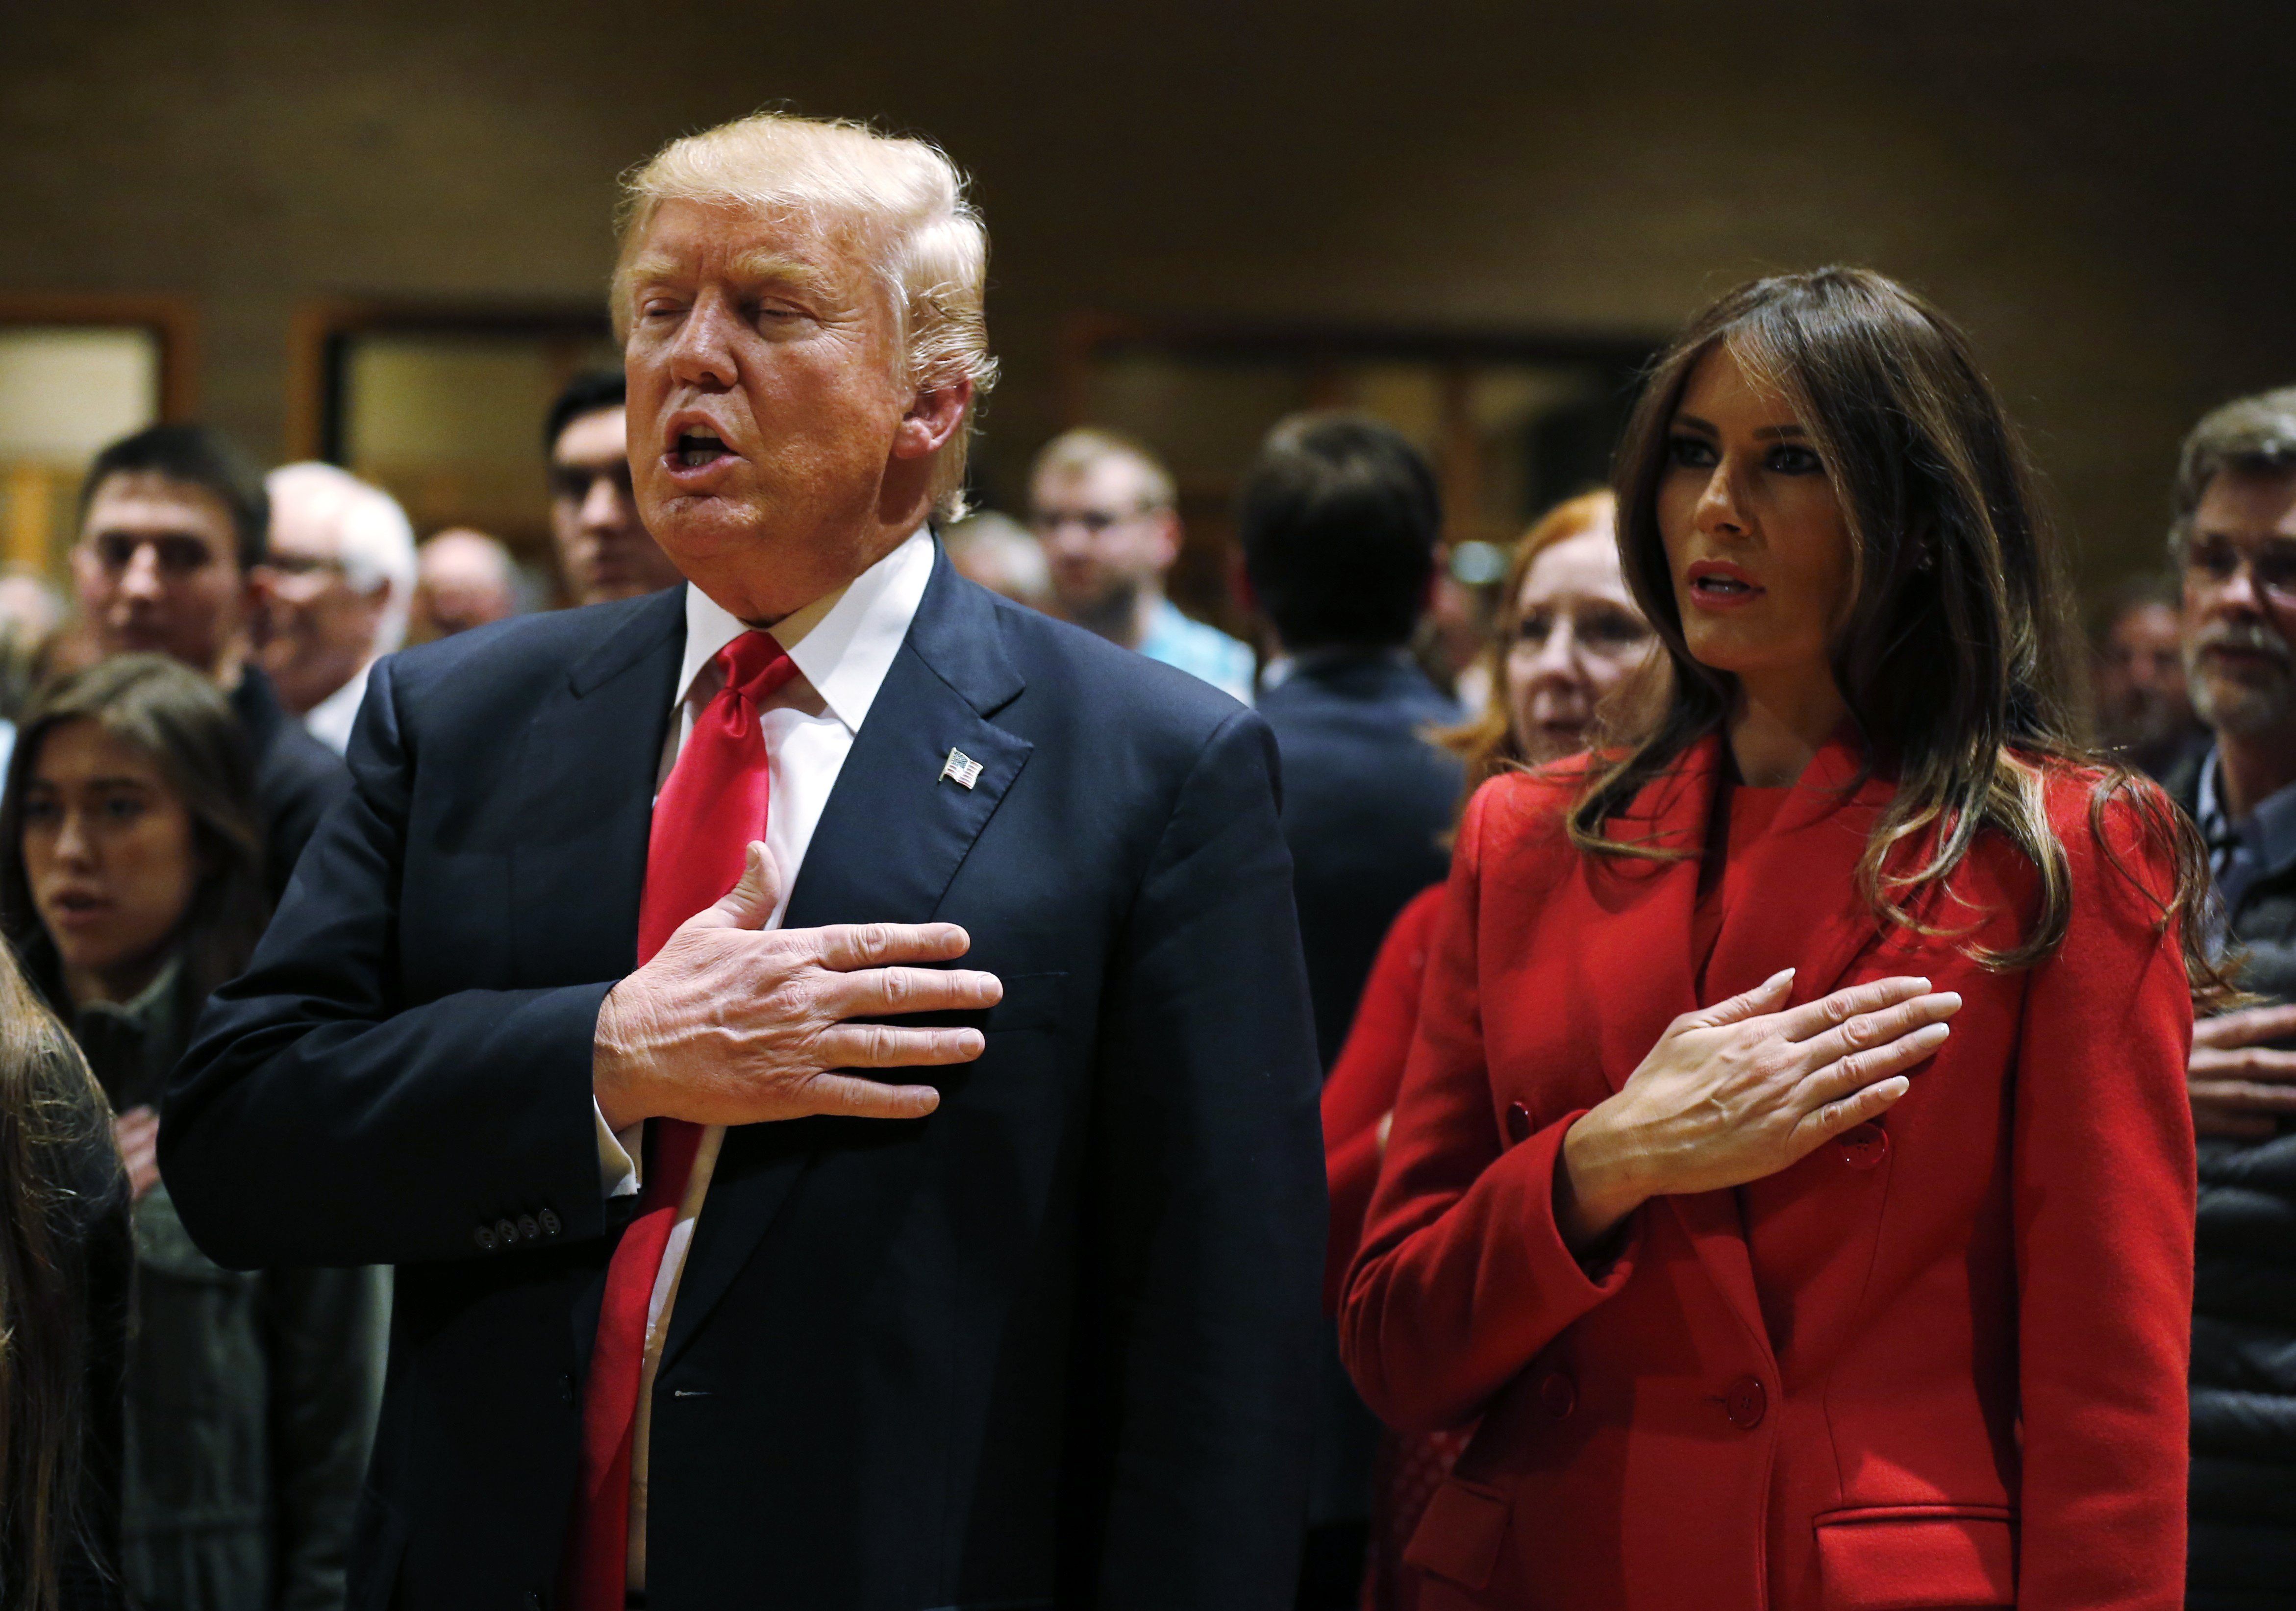 ​Republican Presidential Candidate Donald Trump recites the pledge of allegiance with his wife Melania, back in 2016.